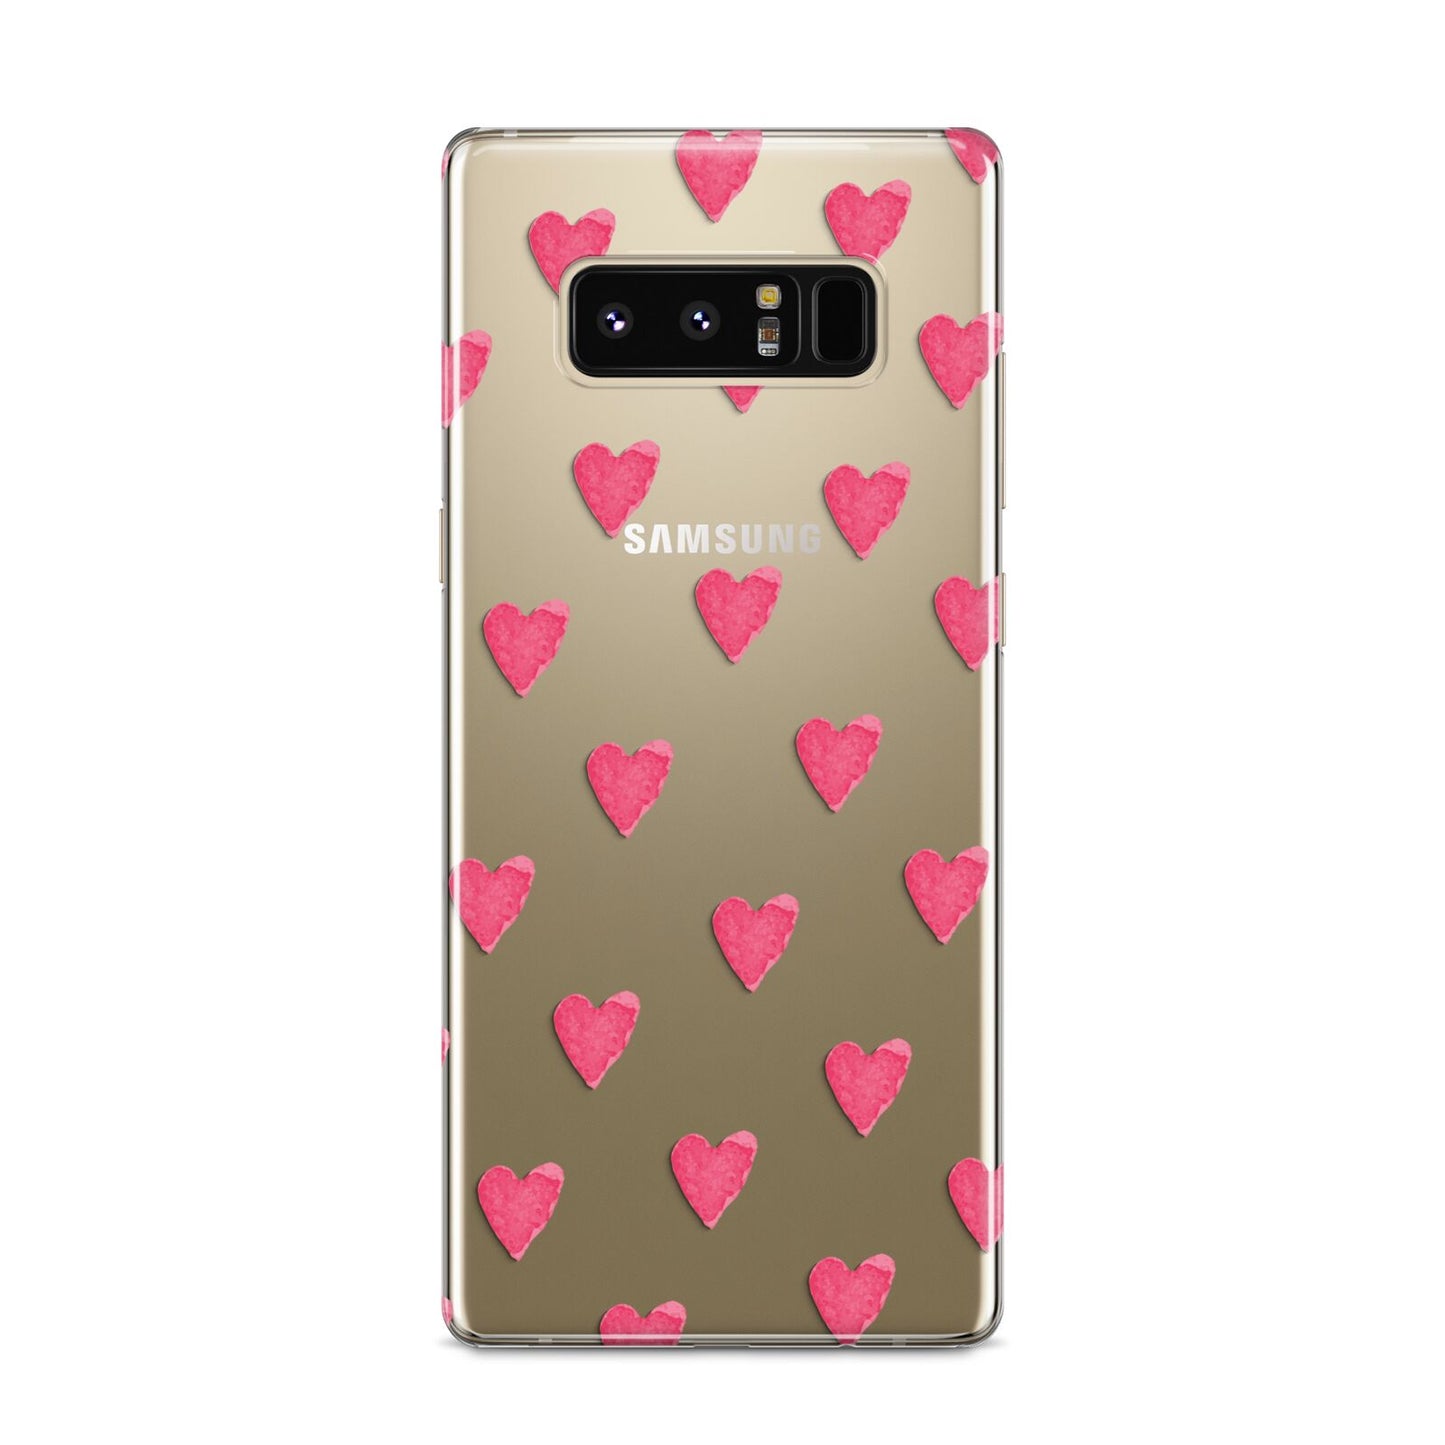 Heart Patterned Samsung Galaxy S8 Case